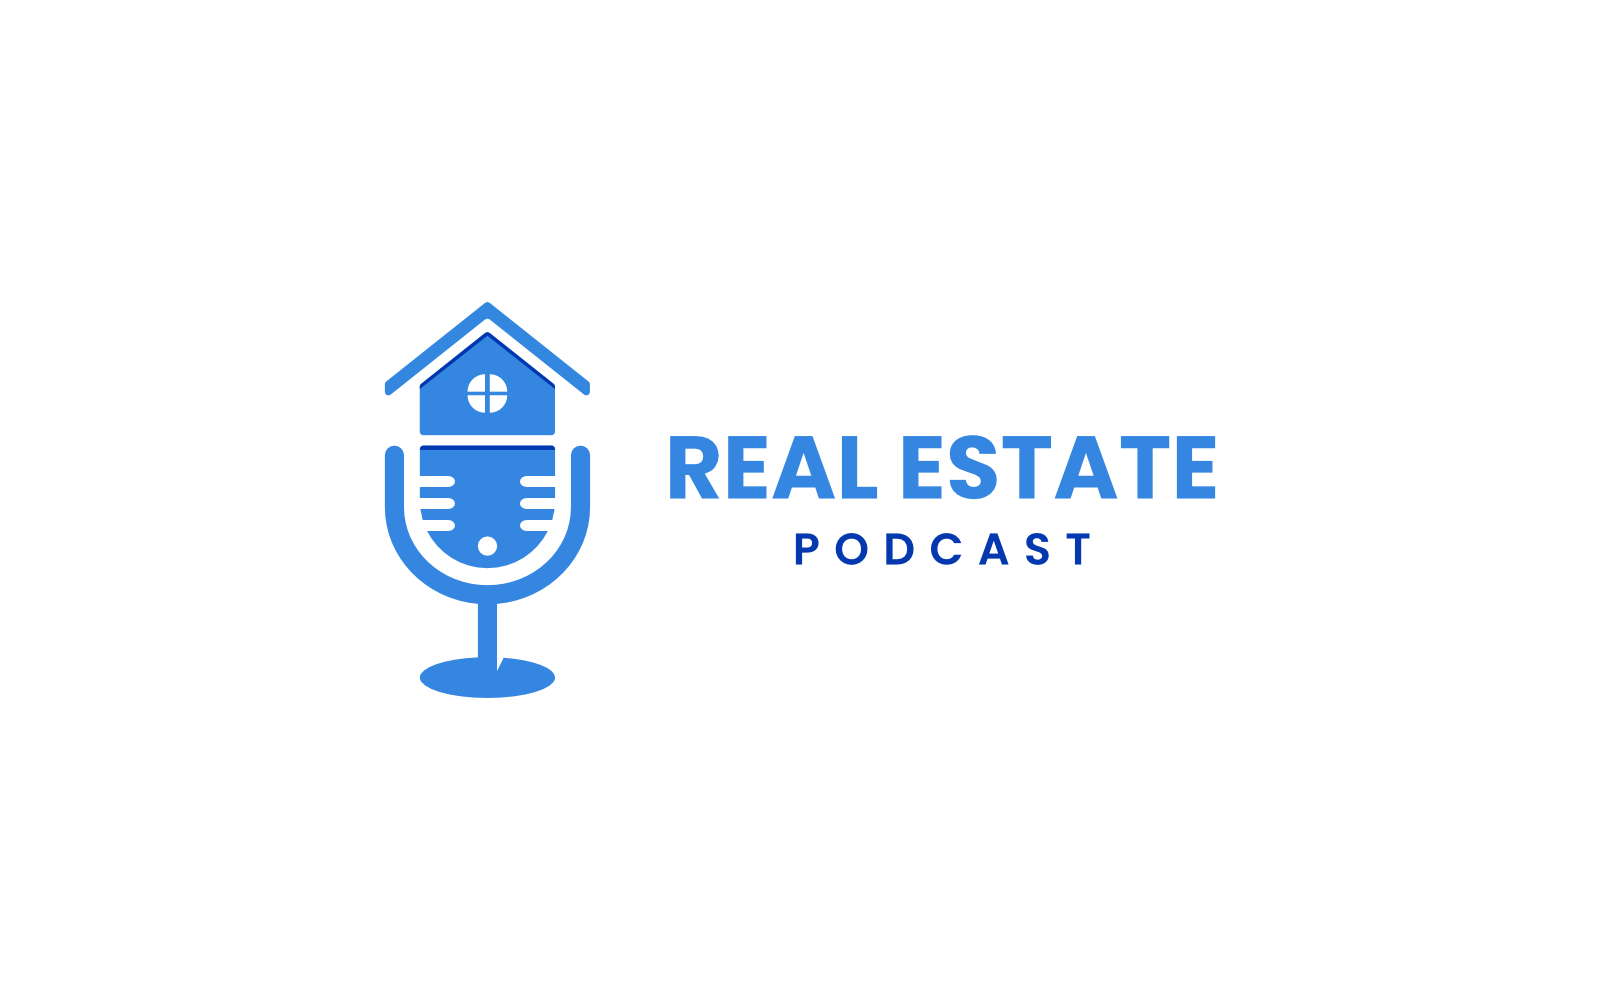 Real Estate Podcast Logo Template